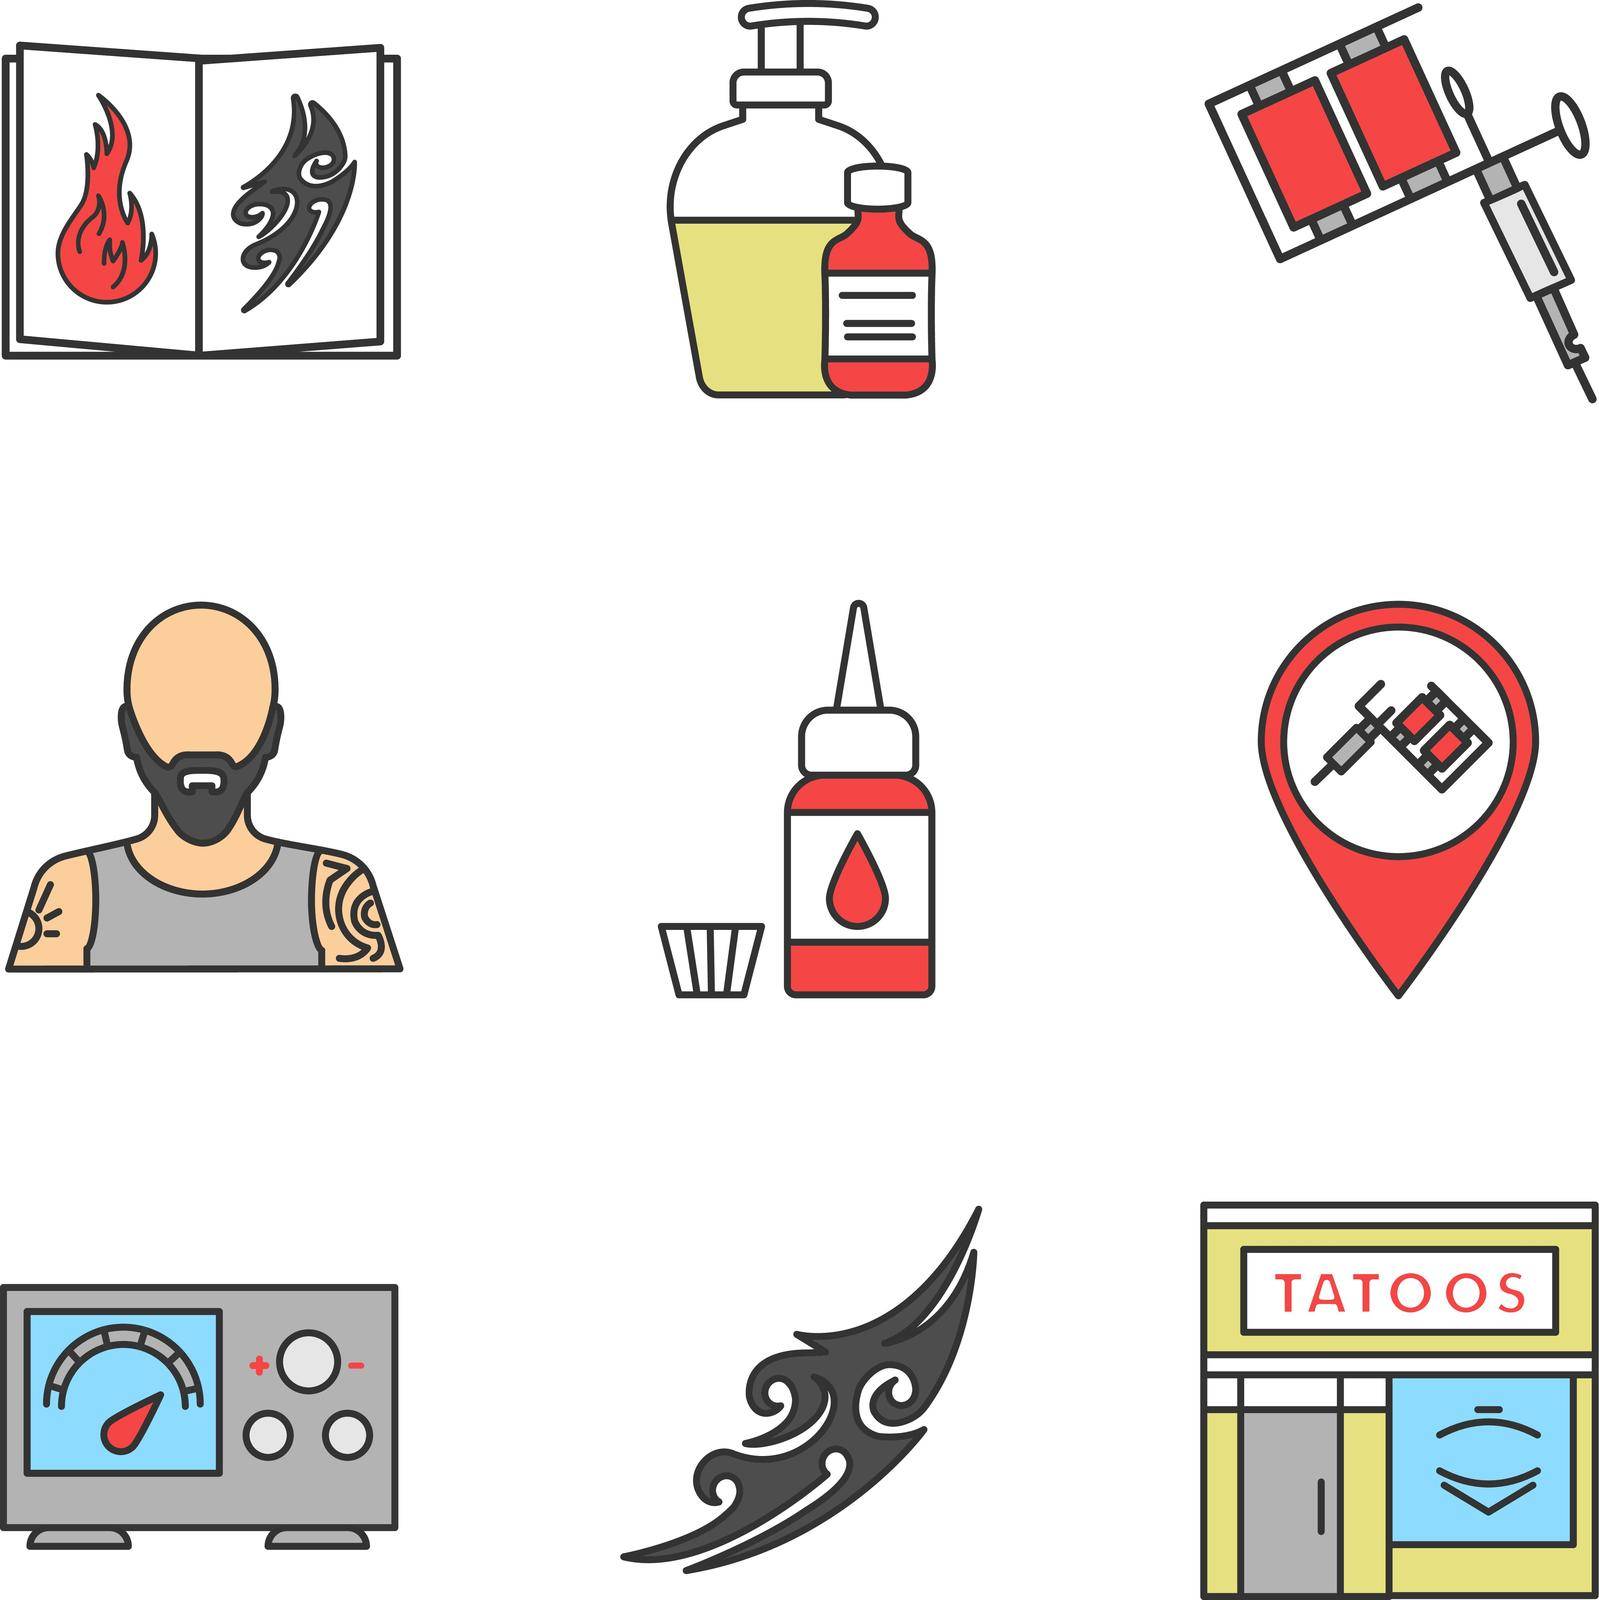 Tattoo studio color icons set. Tattoos catalog, aftercare, tattooist's machine, tattooer, ink bottle and cap, studio location, power supply, sketch, parlour facade. Isolated vector illustrations